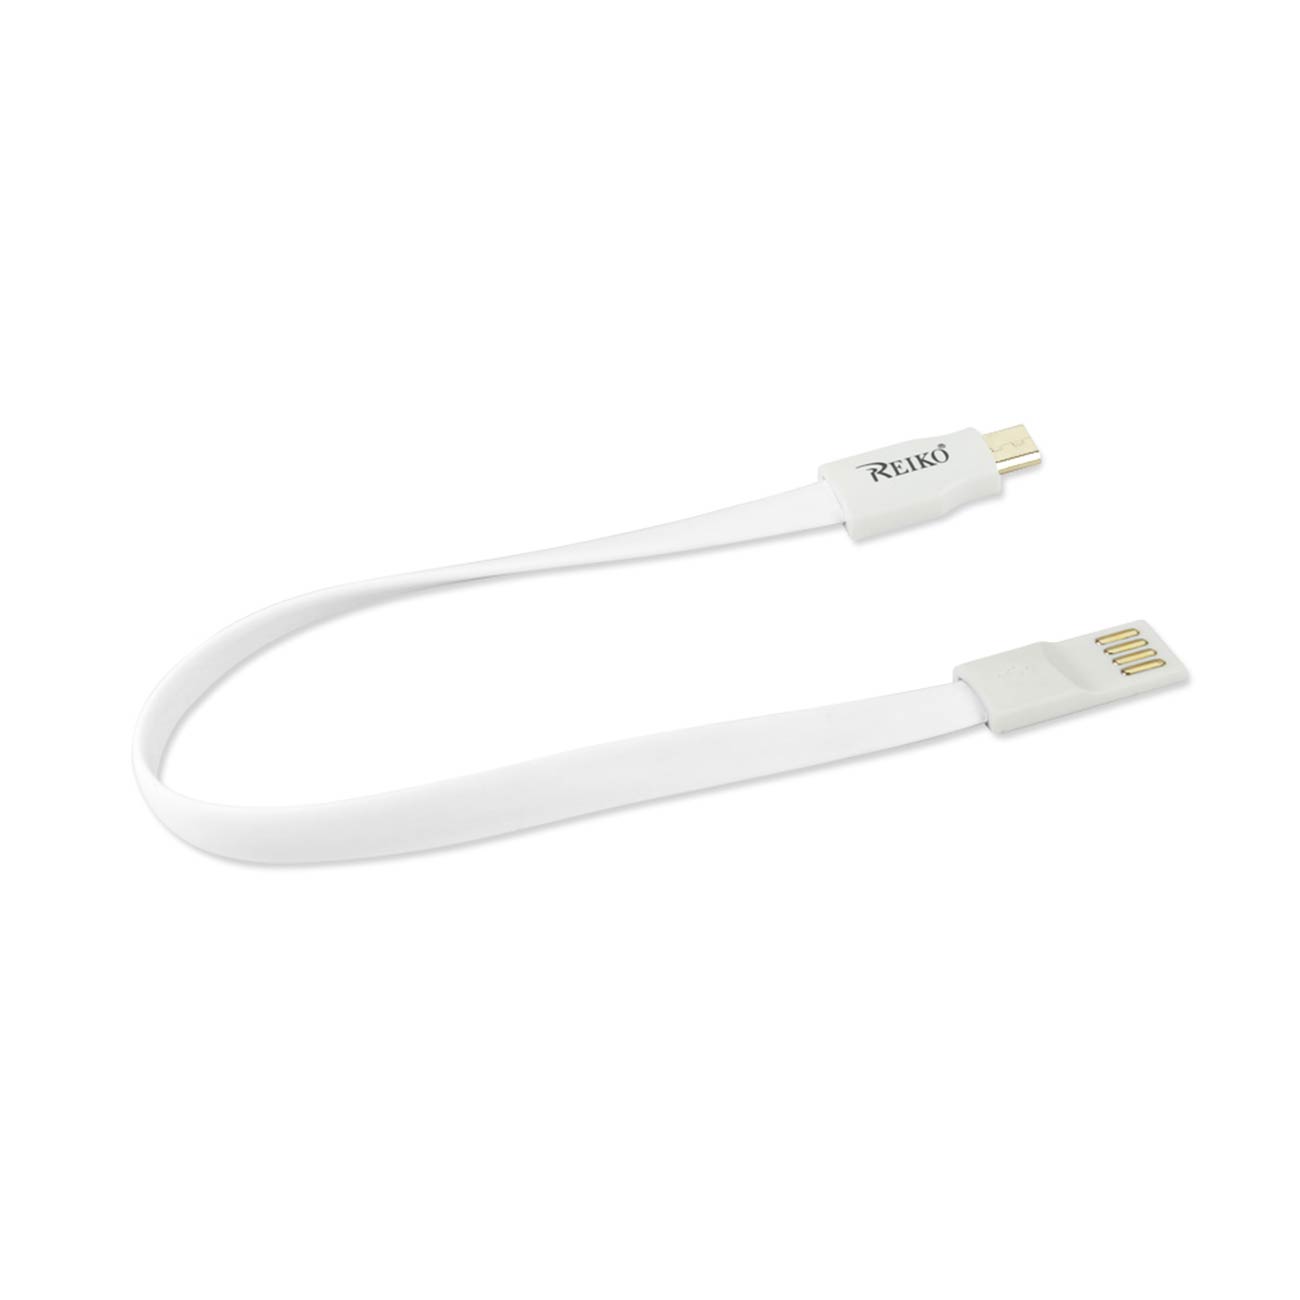 Data Cable USB Micro Flat Magnetic Gold Plated 0.7 Foot White Color